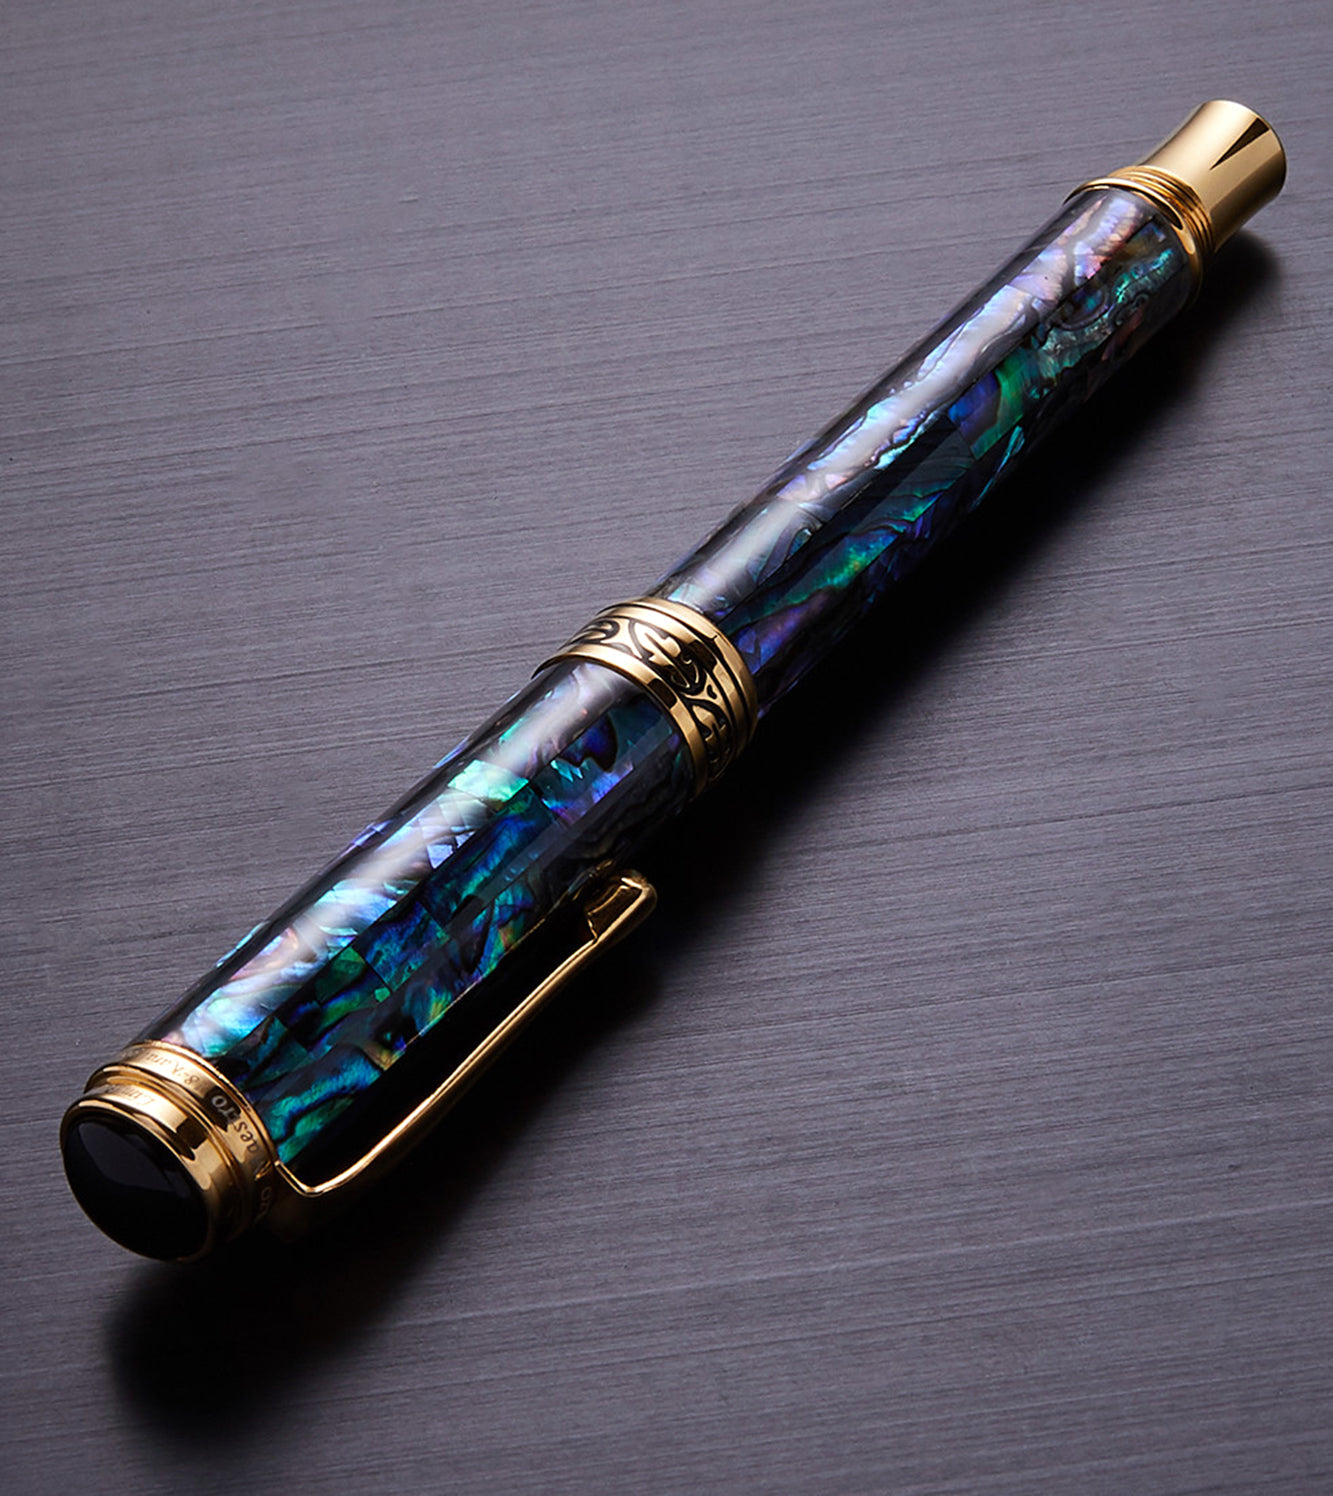 Angled 3D view of the back of the capped Maestro Sea Shell RPG-1 rollerball pen